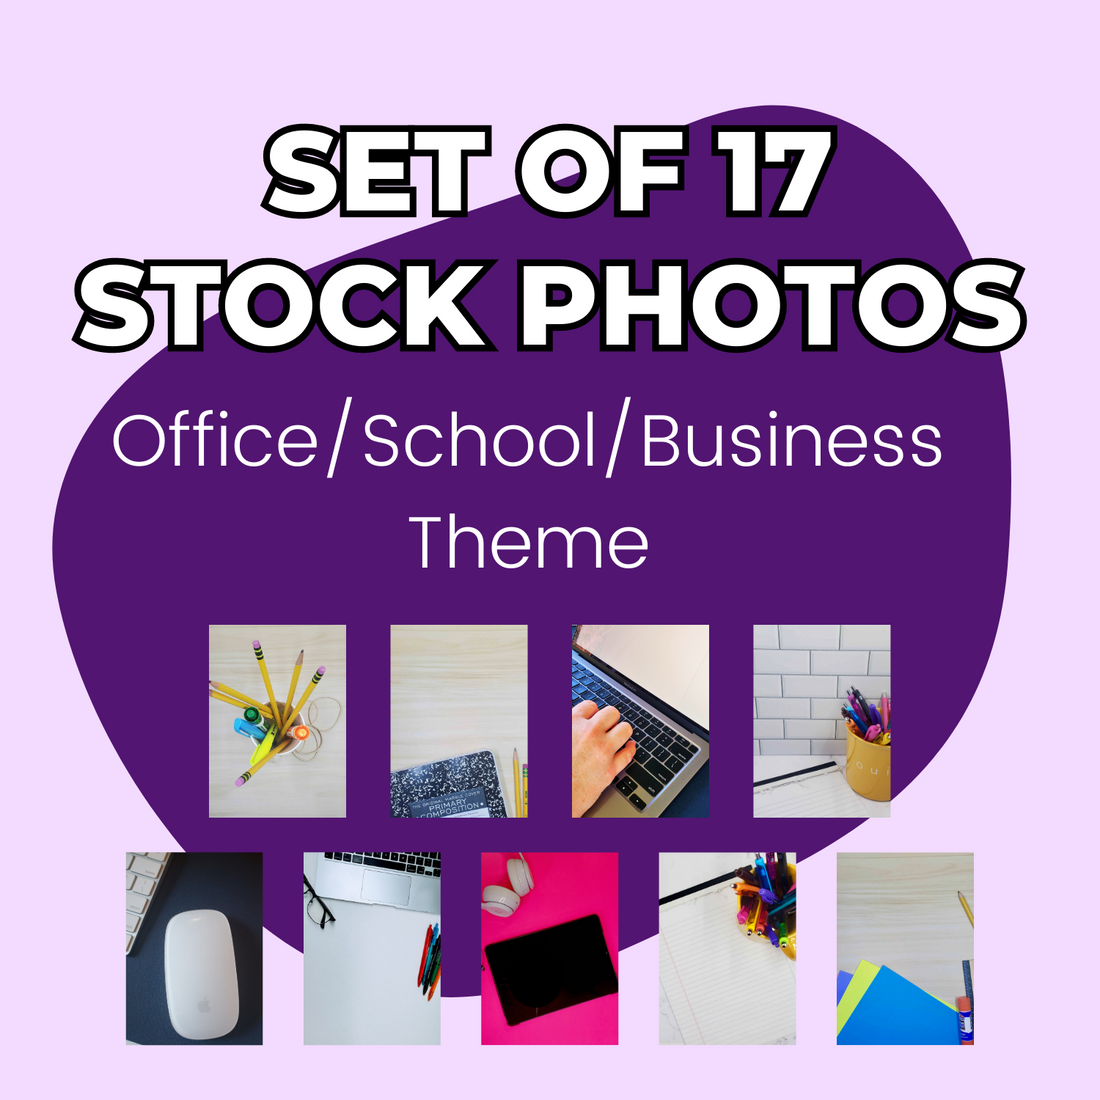 Office, School, and Business Themed Stock Photos (set of 17)